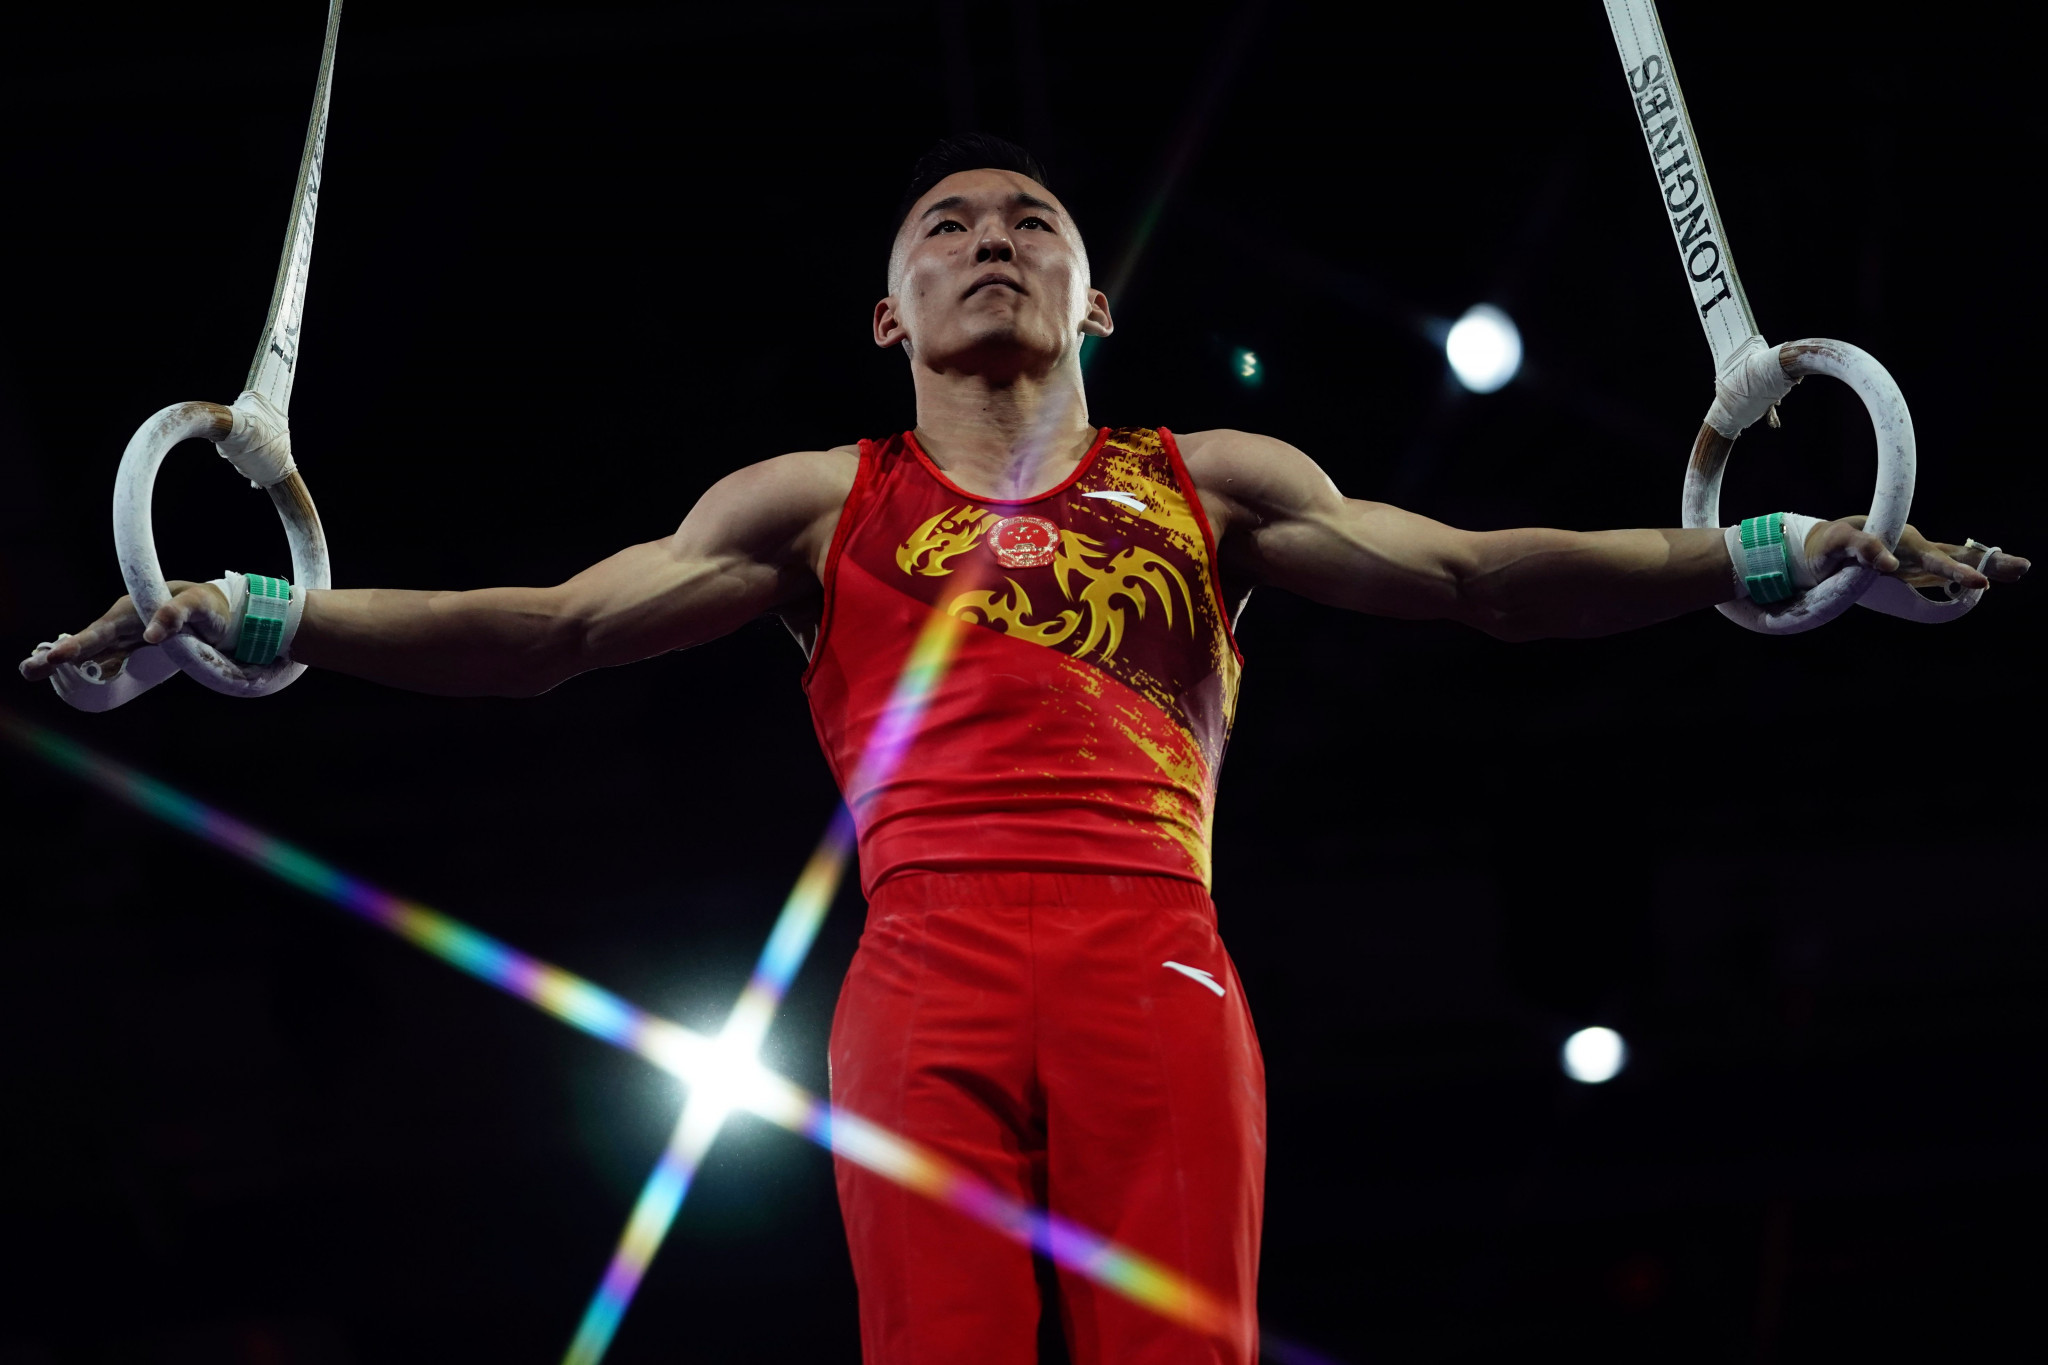 China best of the rest as Russians set bar at FIG Artistic Gymnastics World Championships